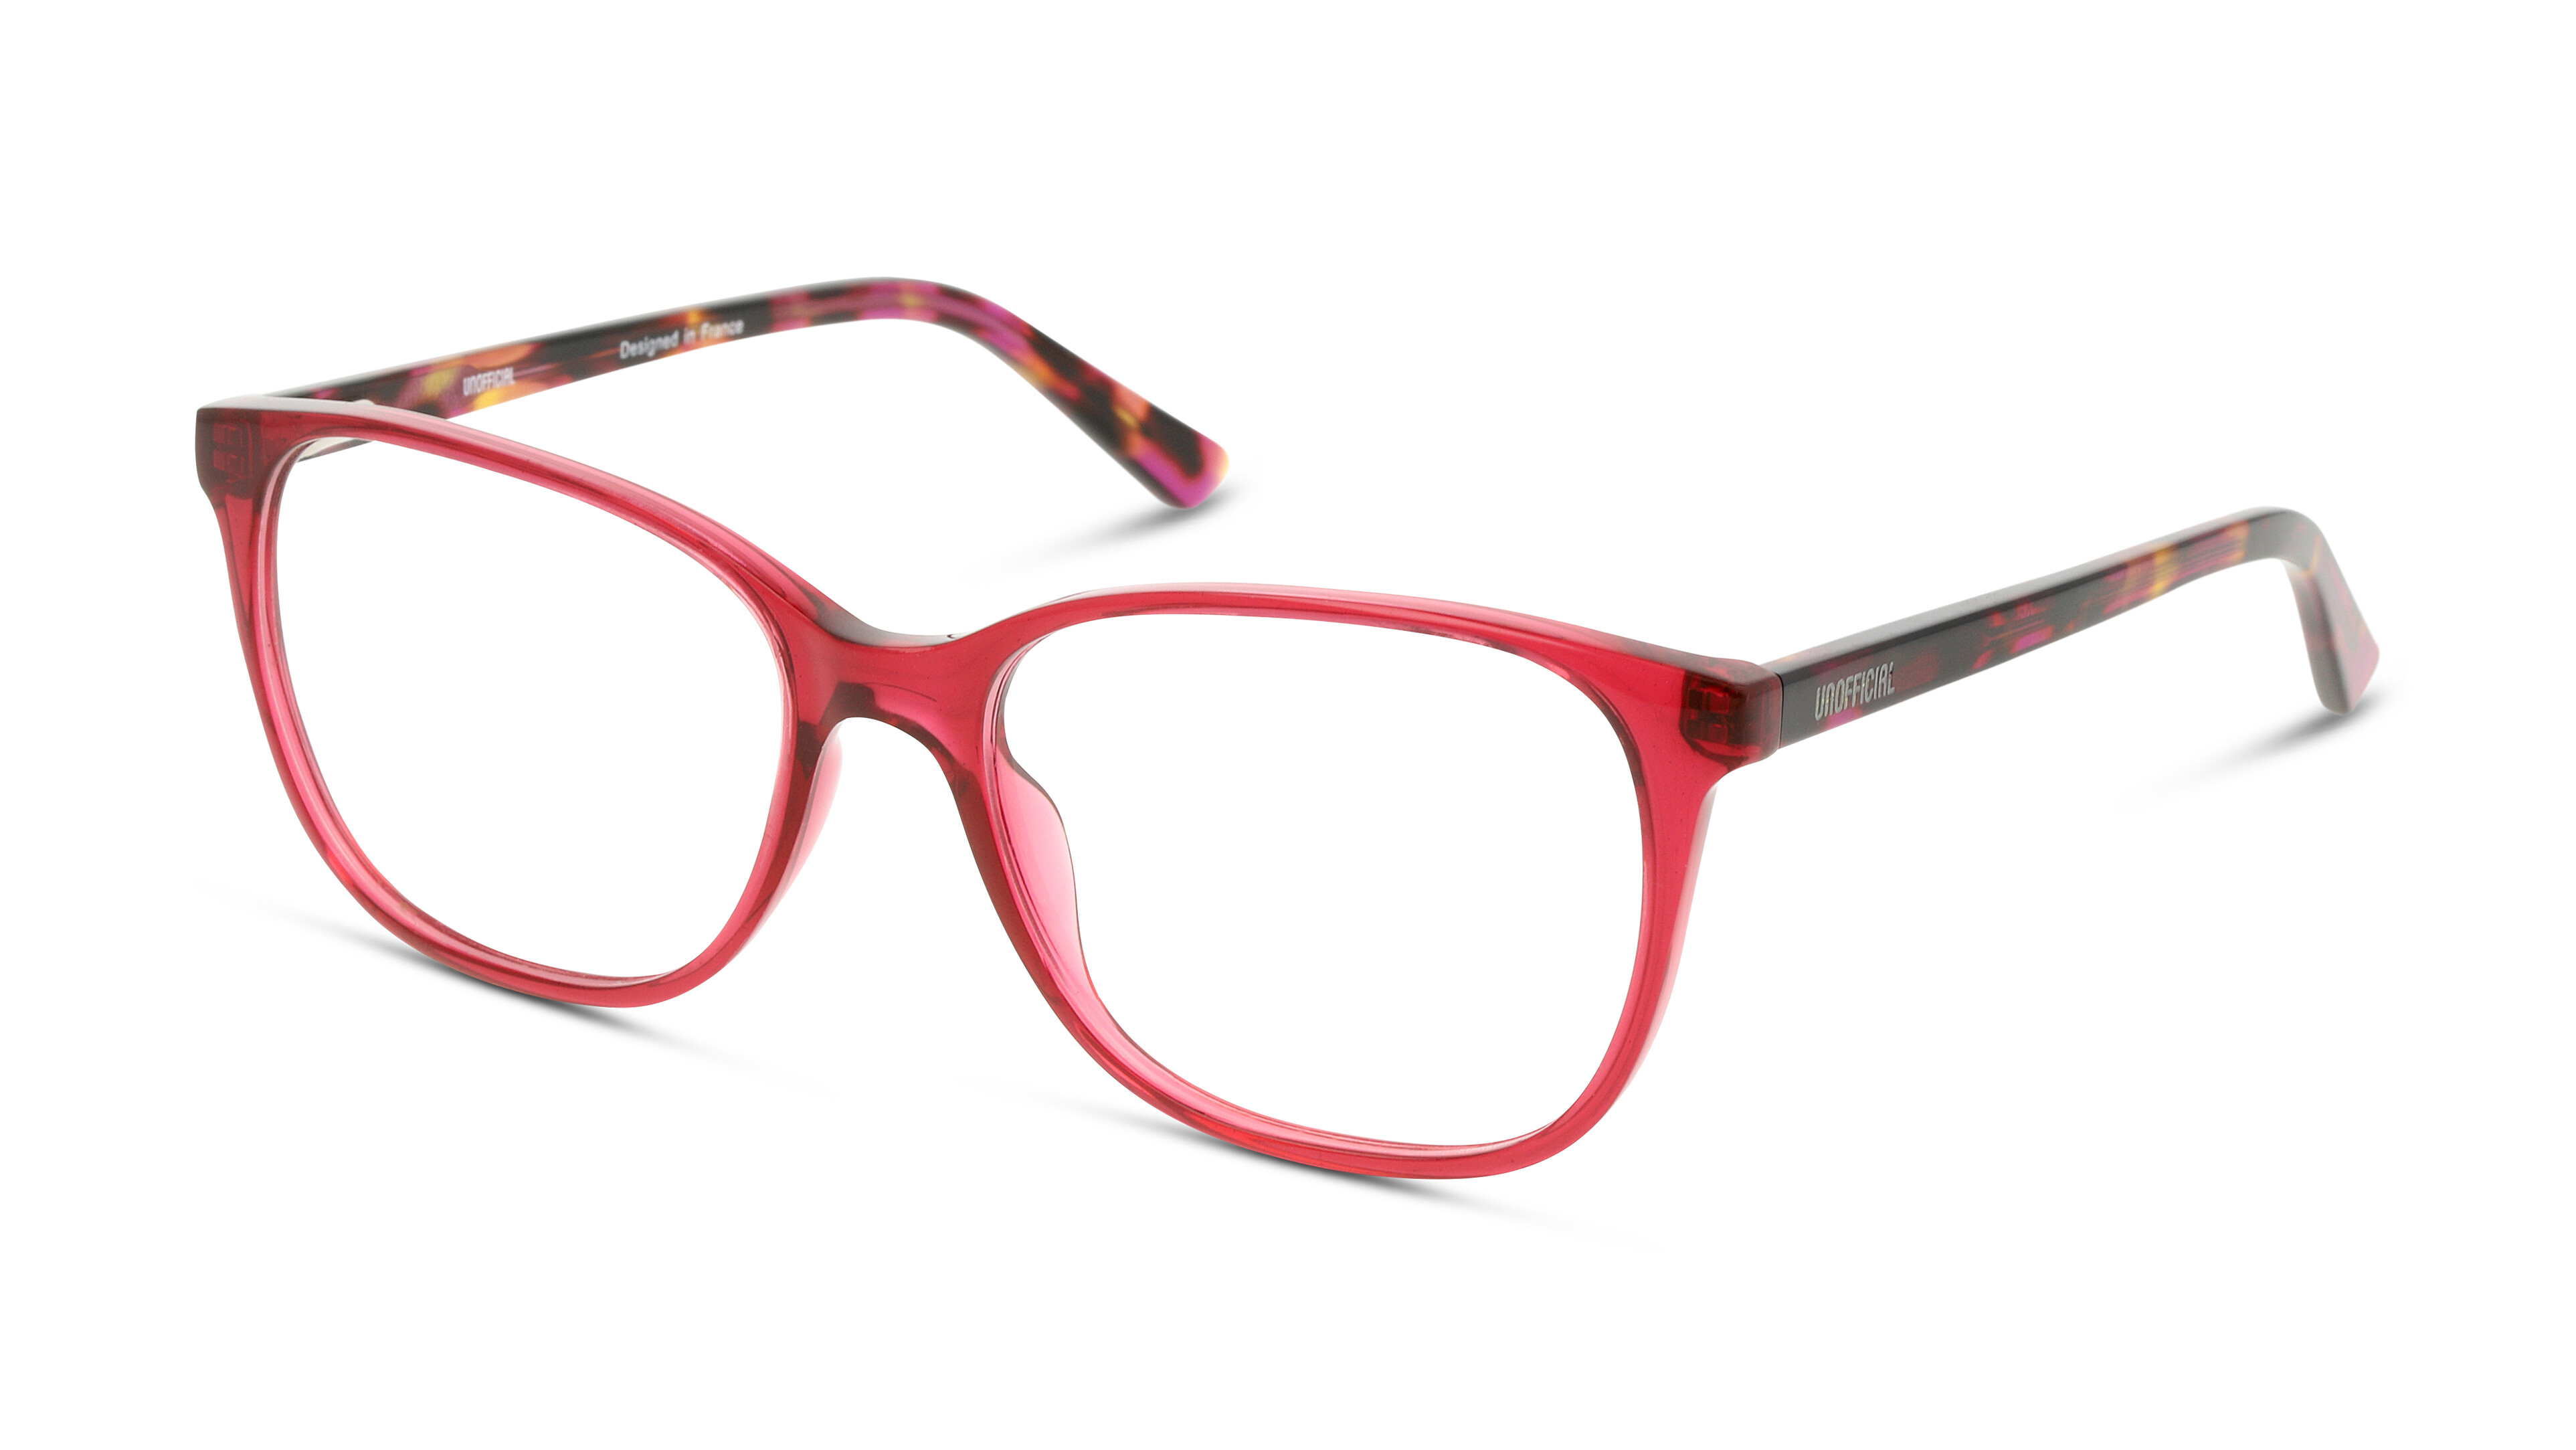 Angle_Left01 UNOFFICIAL UNOF0236 RH00 Brille Rosa